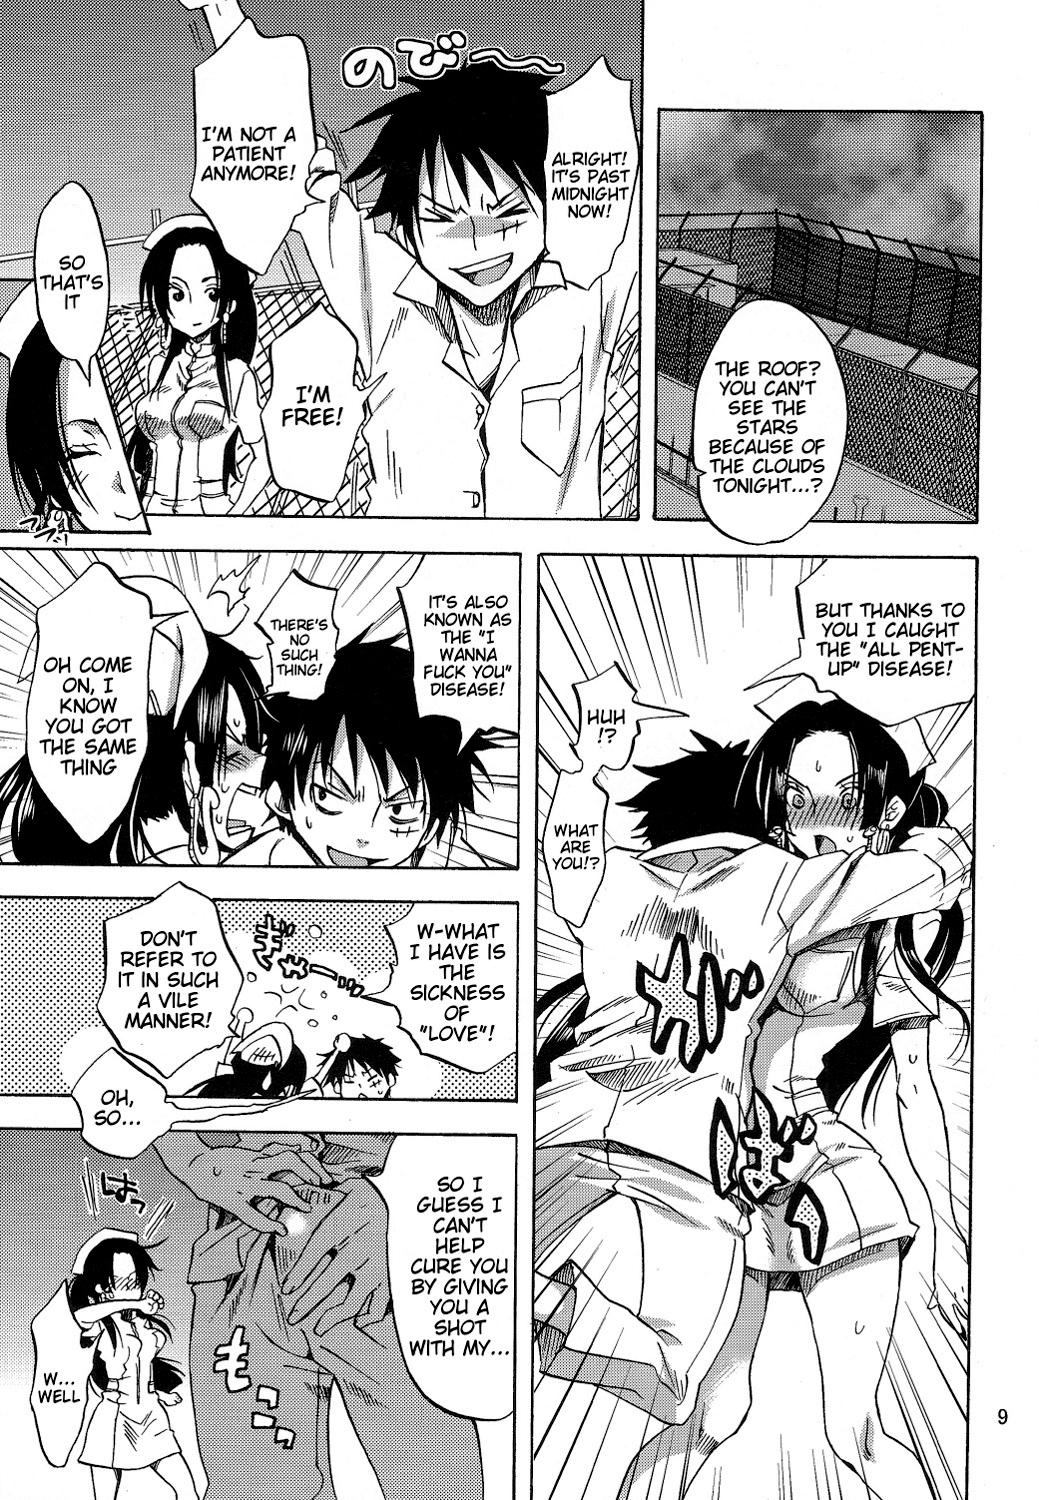 Buttplug Pirates Hospital - One piece Family Porn - Page 8